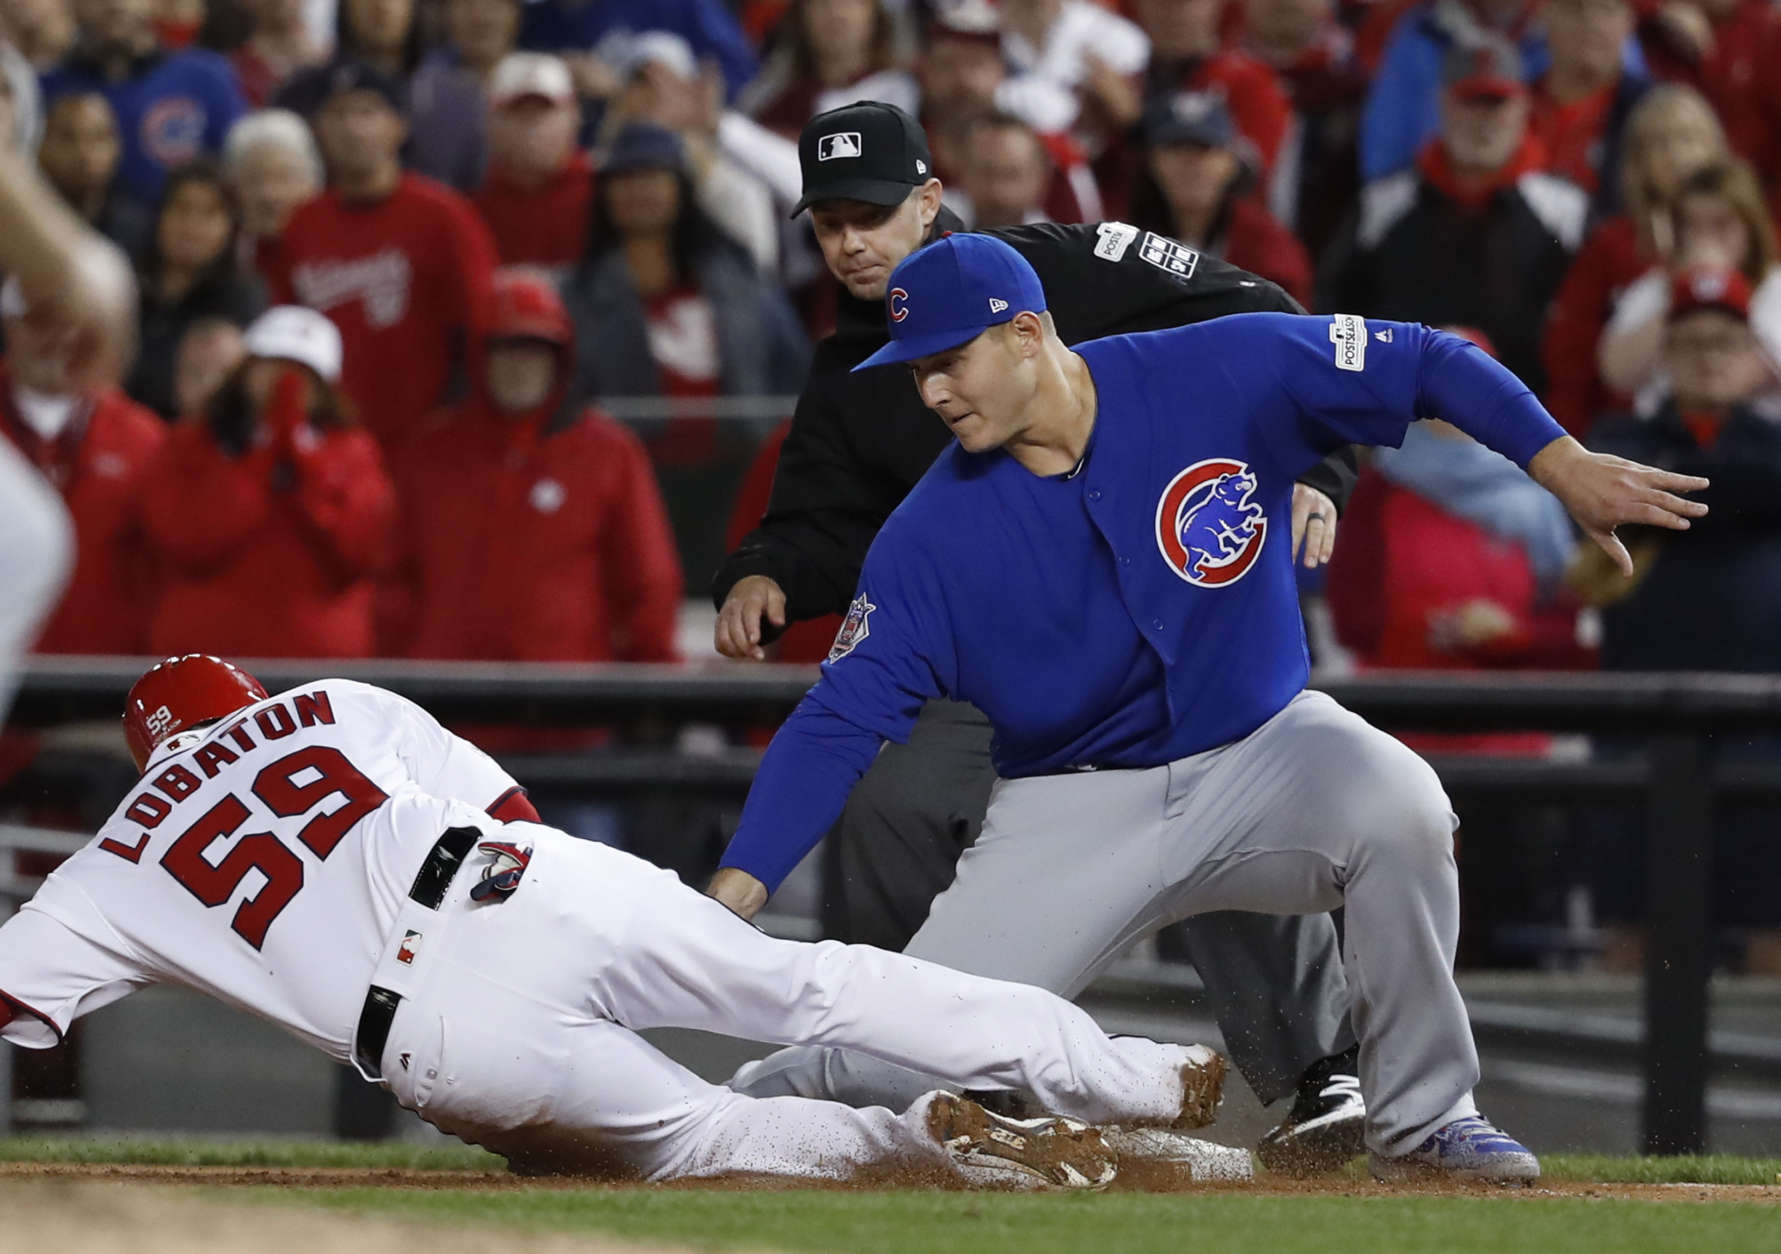 Chicago Cubs first baseman Anthony Rizzo (44) picks off Washington Nationals' Jose Lobaton on a throw from catcher Willson Contreras during the eighth inning in Game 5 of baseball's National League Division Series against the Chicago Cubs, at Nationals Park, early Friday, Oct. 13, 2017, in Washington. The Cubs challenged the call on the field and it was overturned on review. (AP Photo/Pablo Martinez Monsivais)